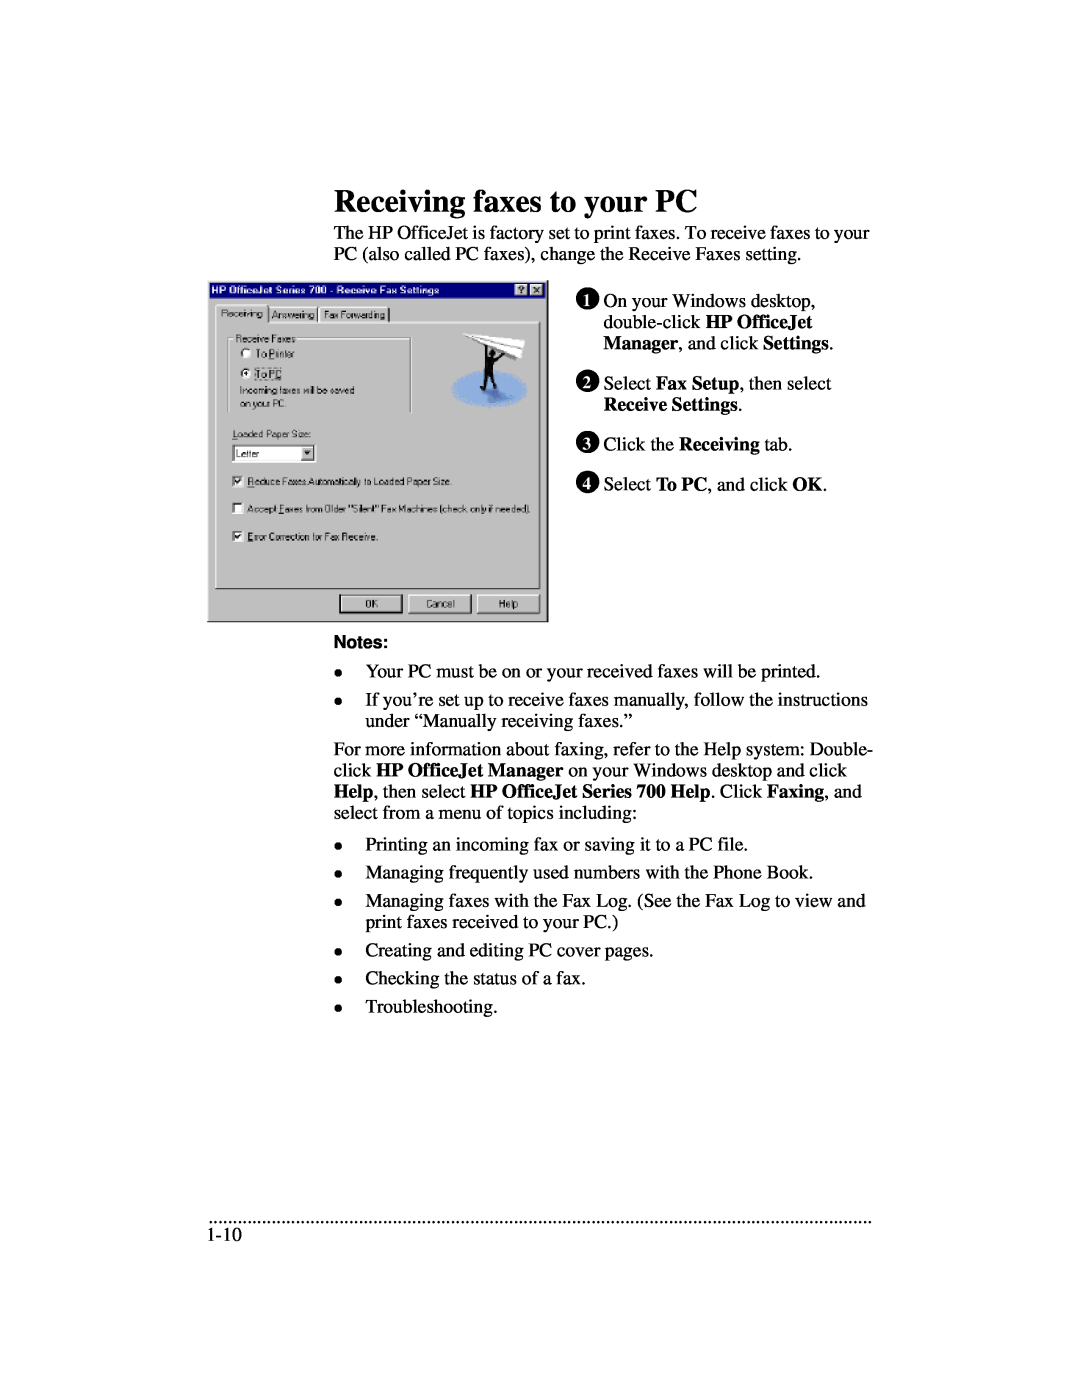 HP 700 manual Receiving faxes to your PC, Receive Settings 